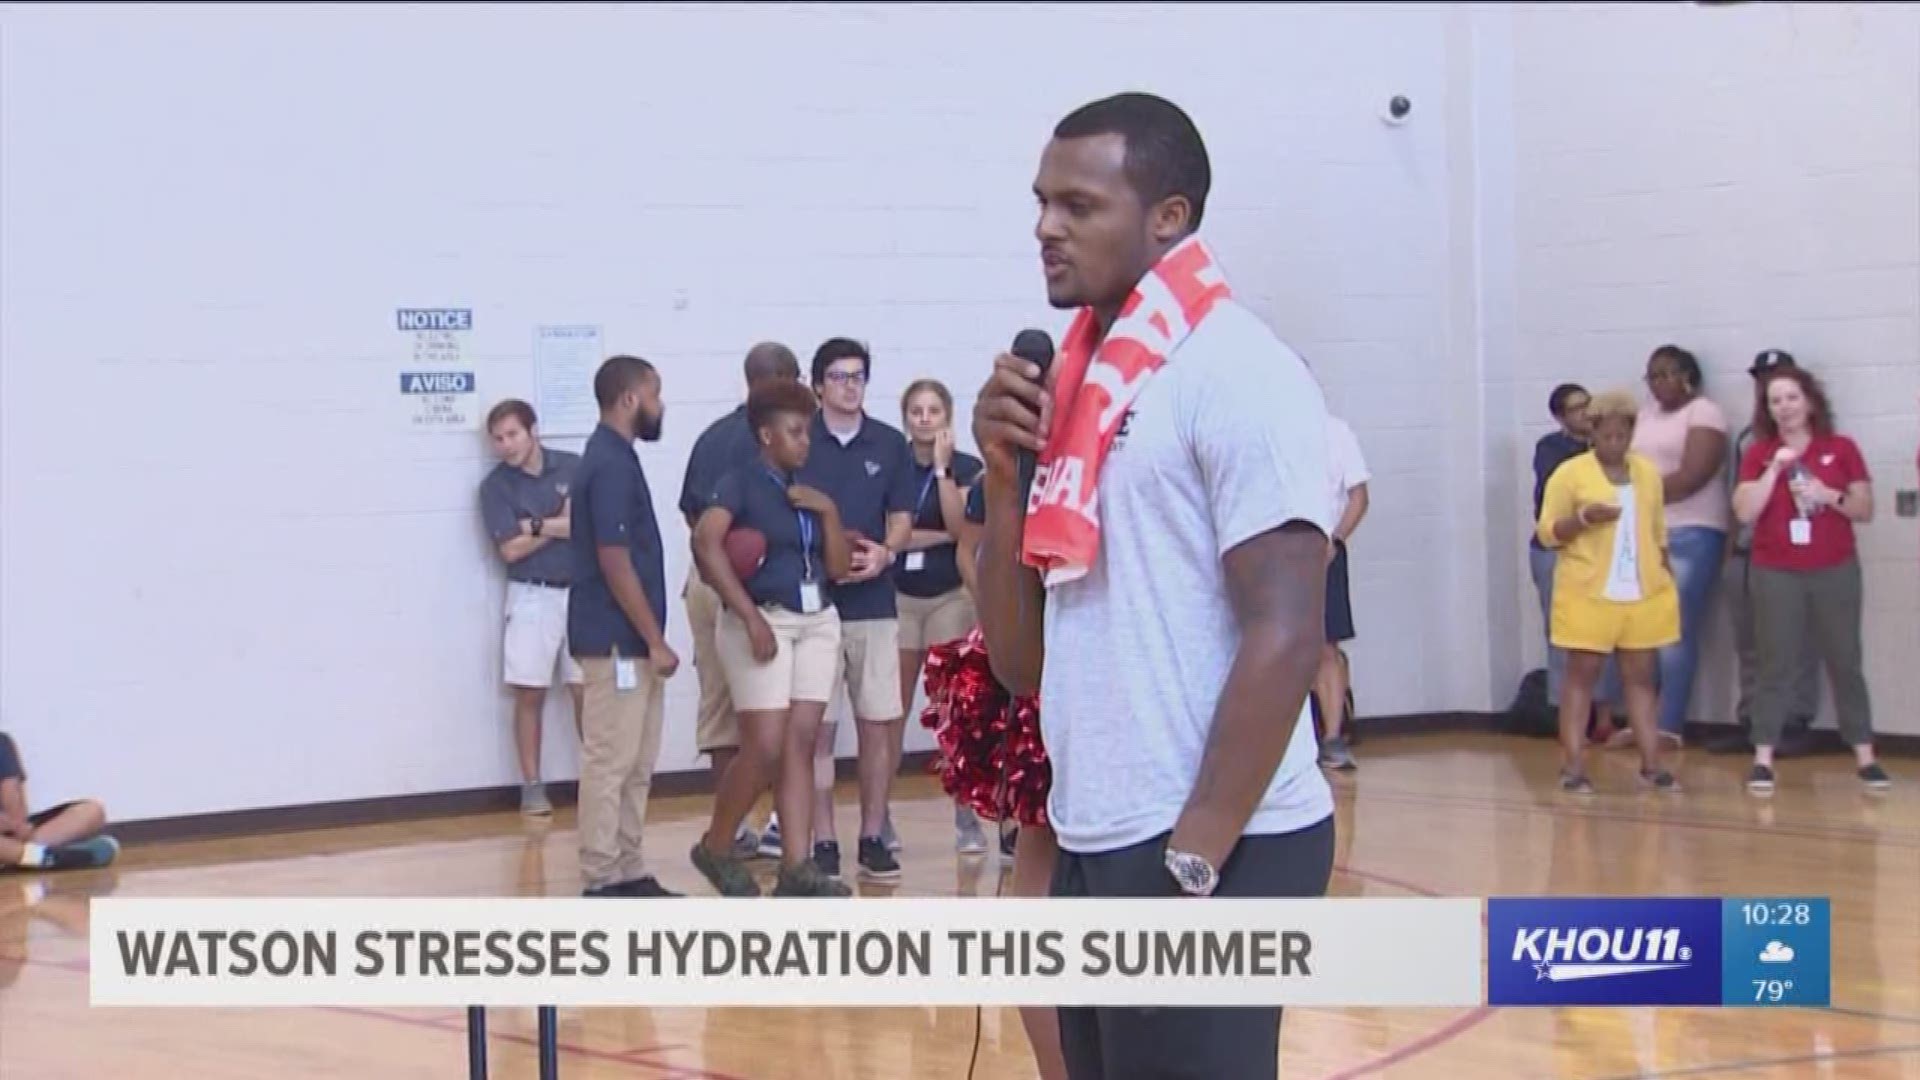 Houston Texans quarterback spoke with kids at the Houston Texans YMCA on Thursday and talked about embracing his leadership role on the team.